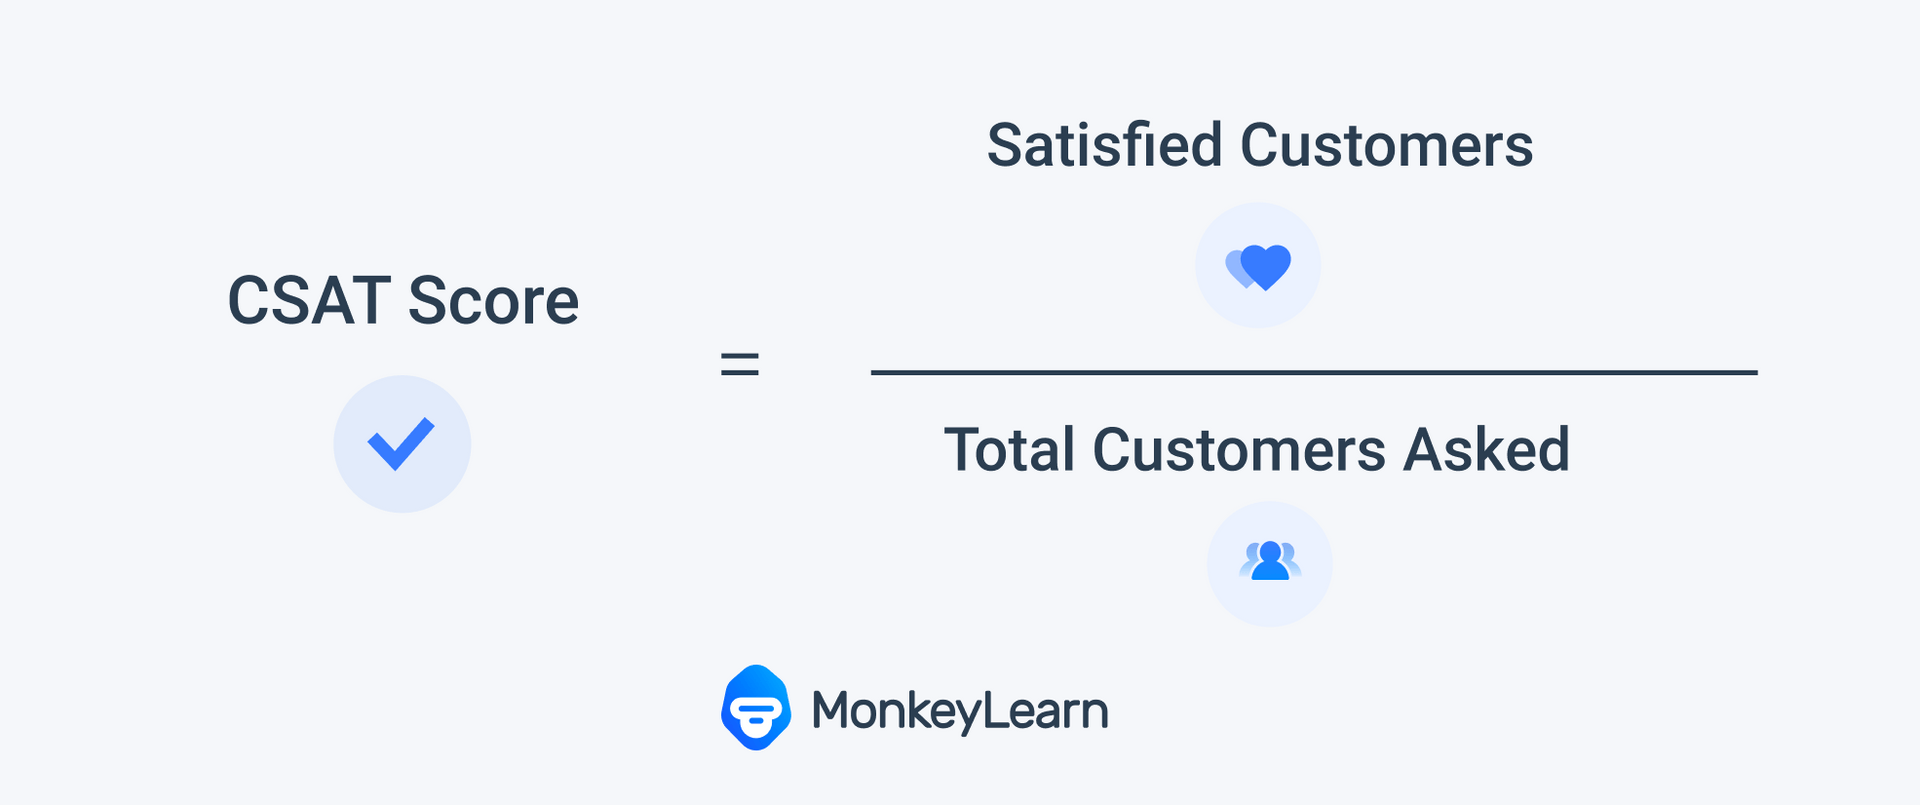 CSAT Score = Satisfied customers divided by total customers asked.